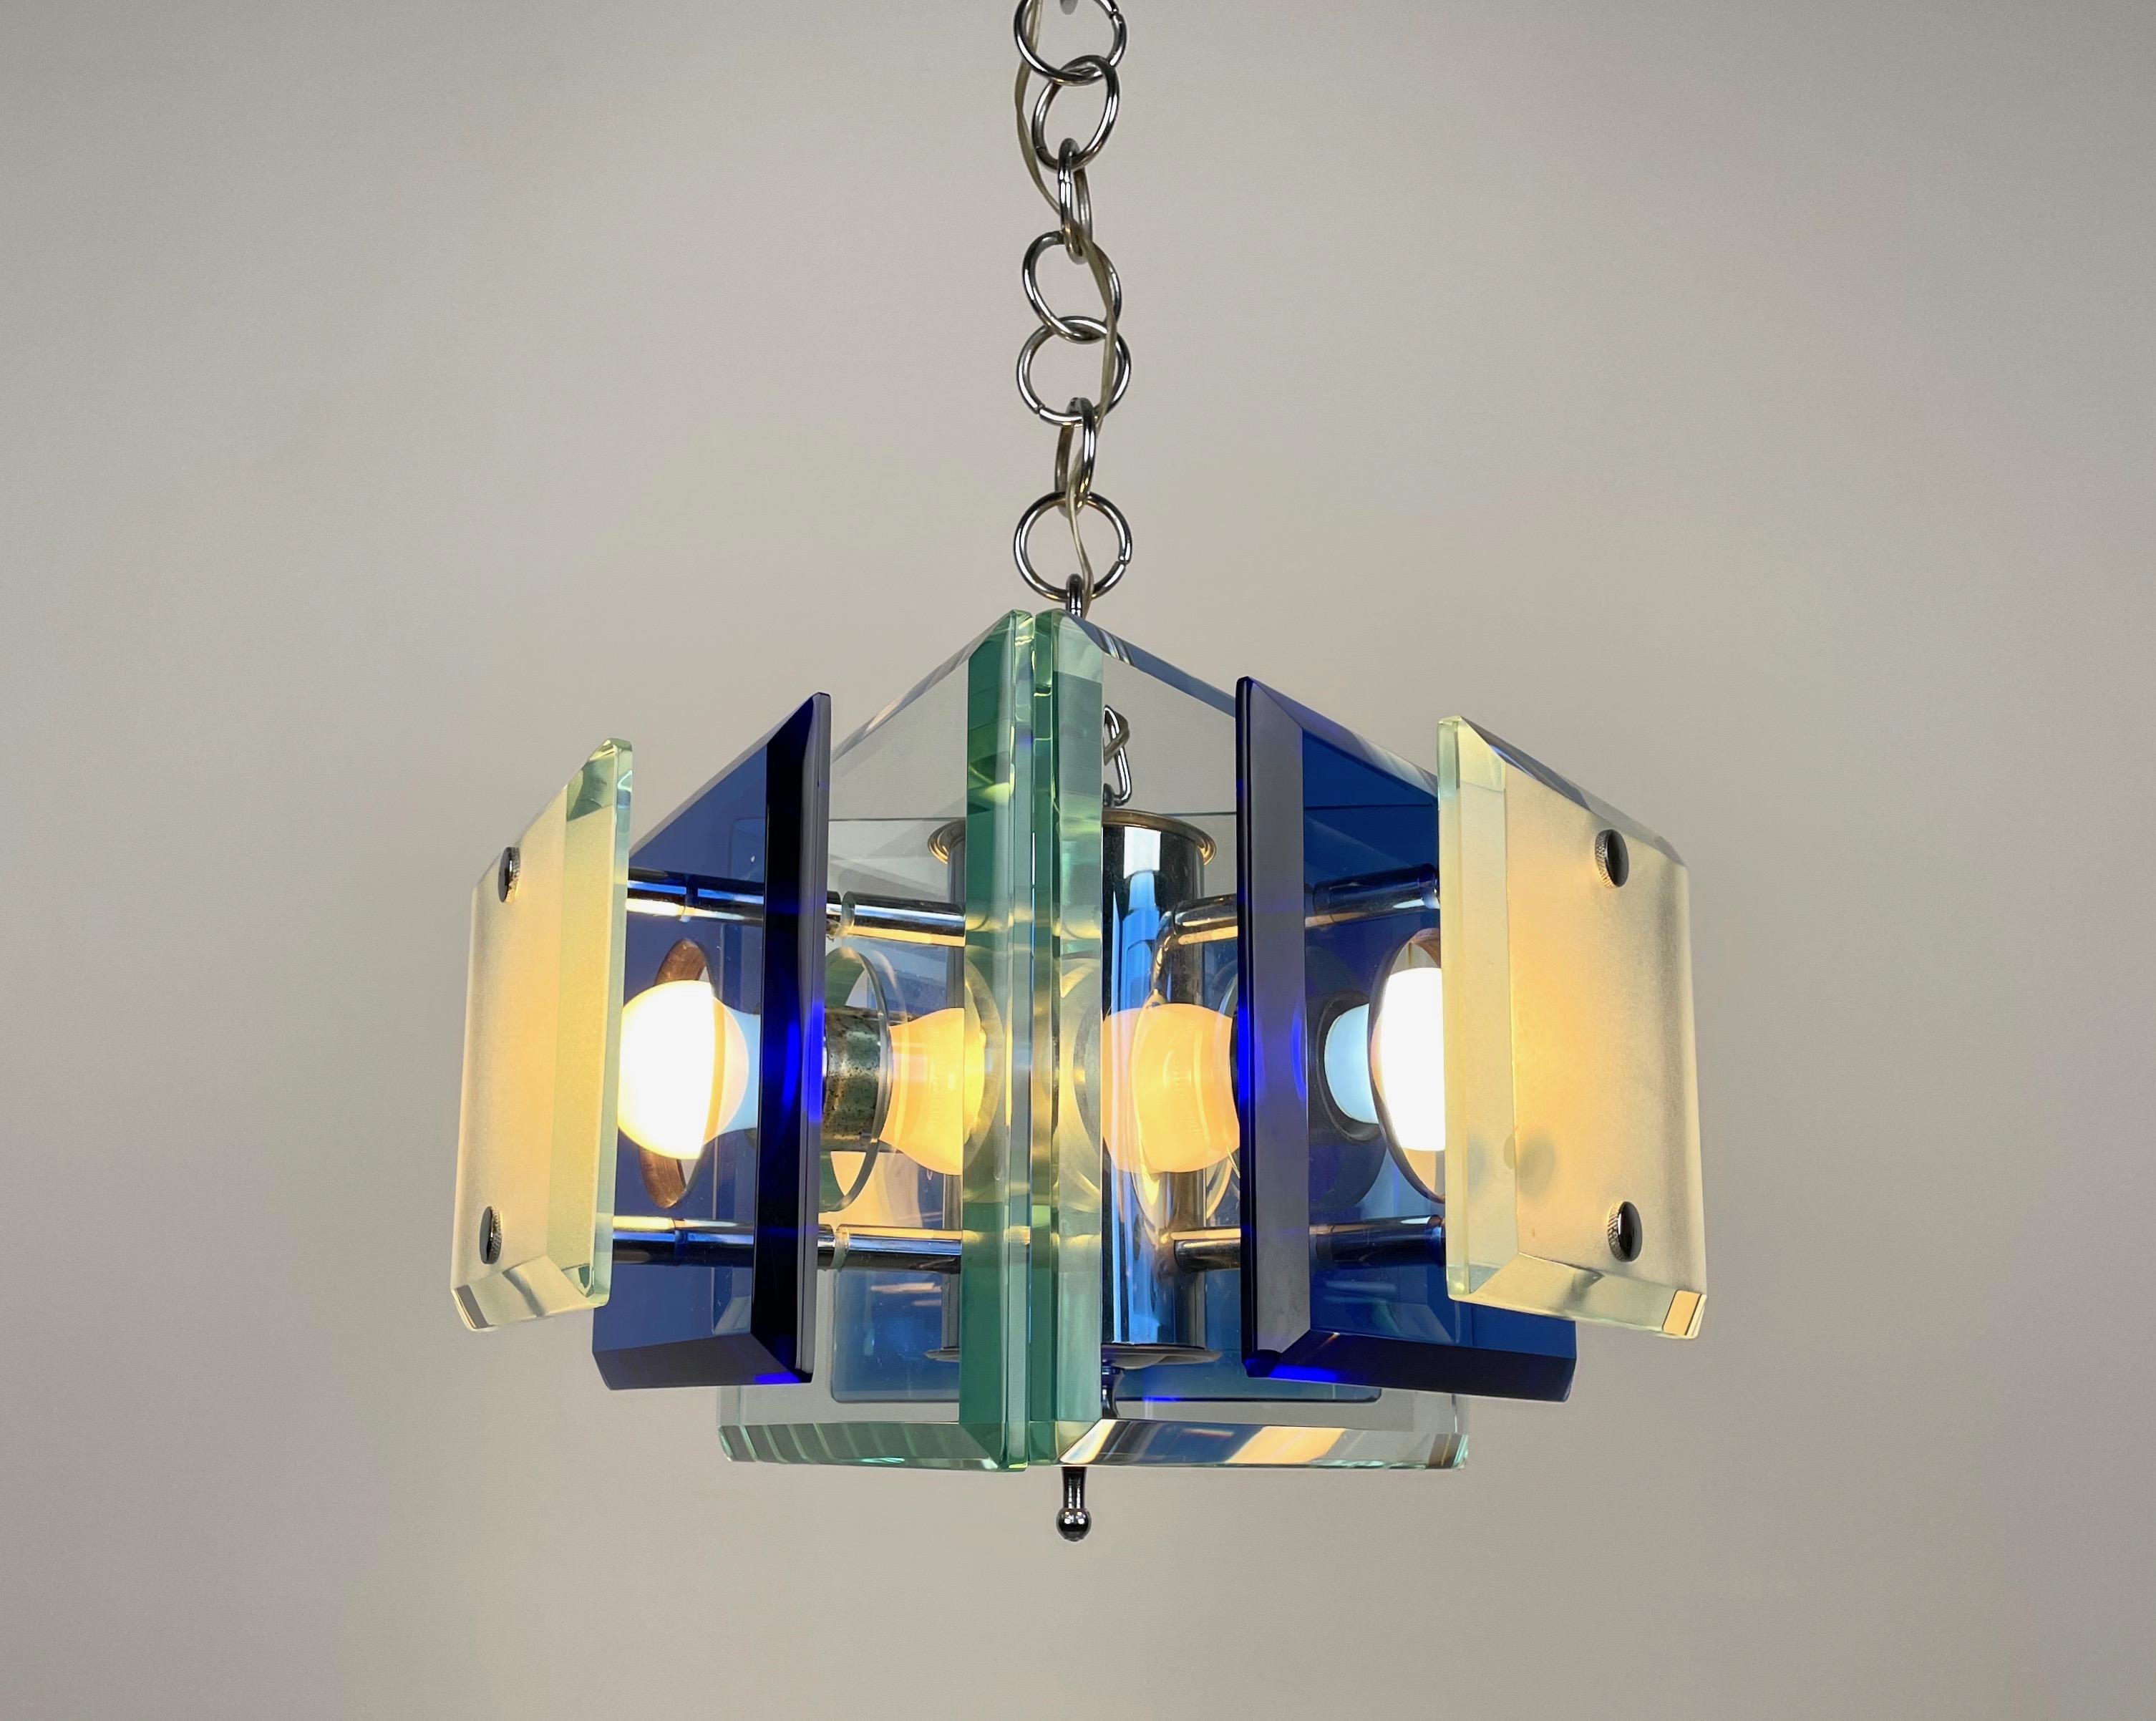 Lupi Cristal Luxor Blue Glass and Chrome Chandelier, Italy, 1970s For Sale 1